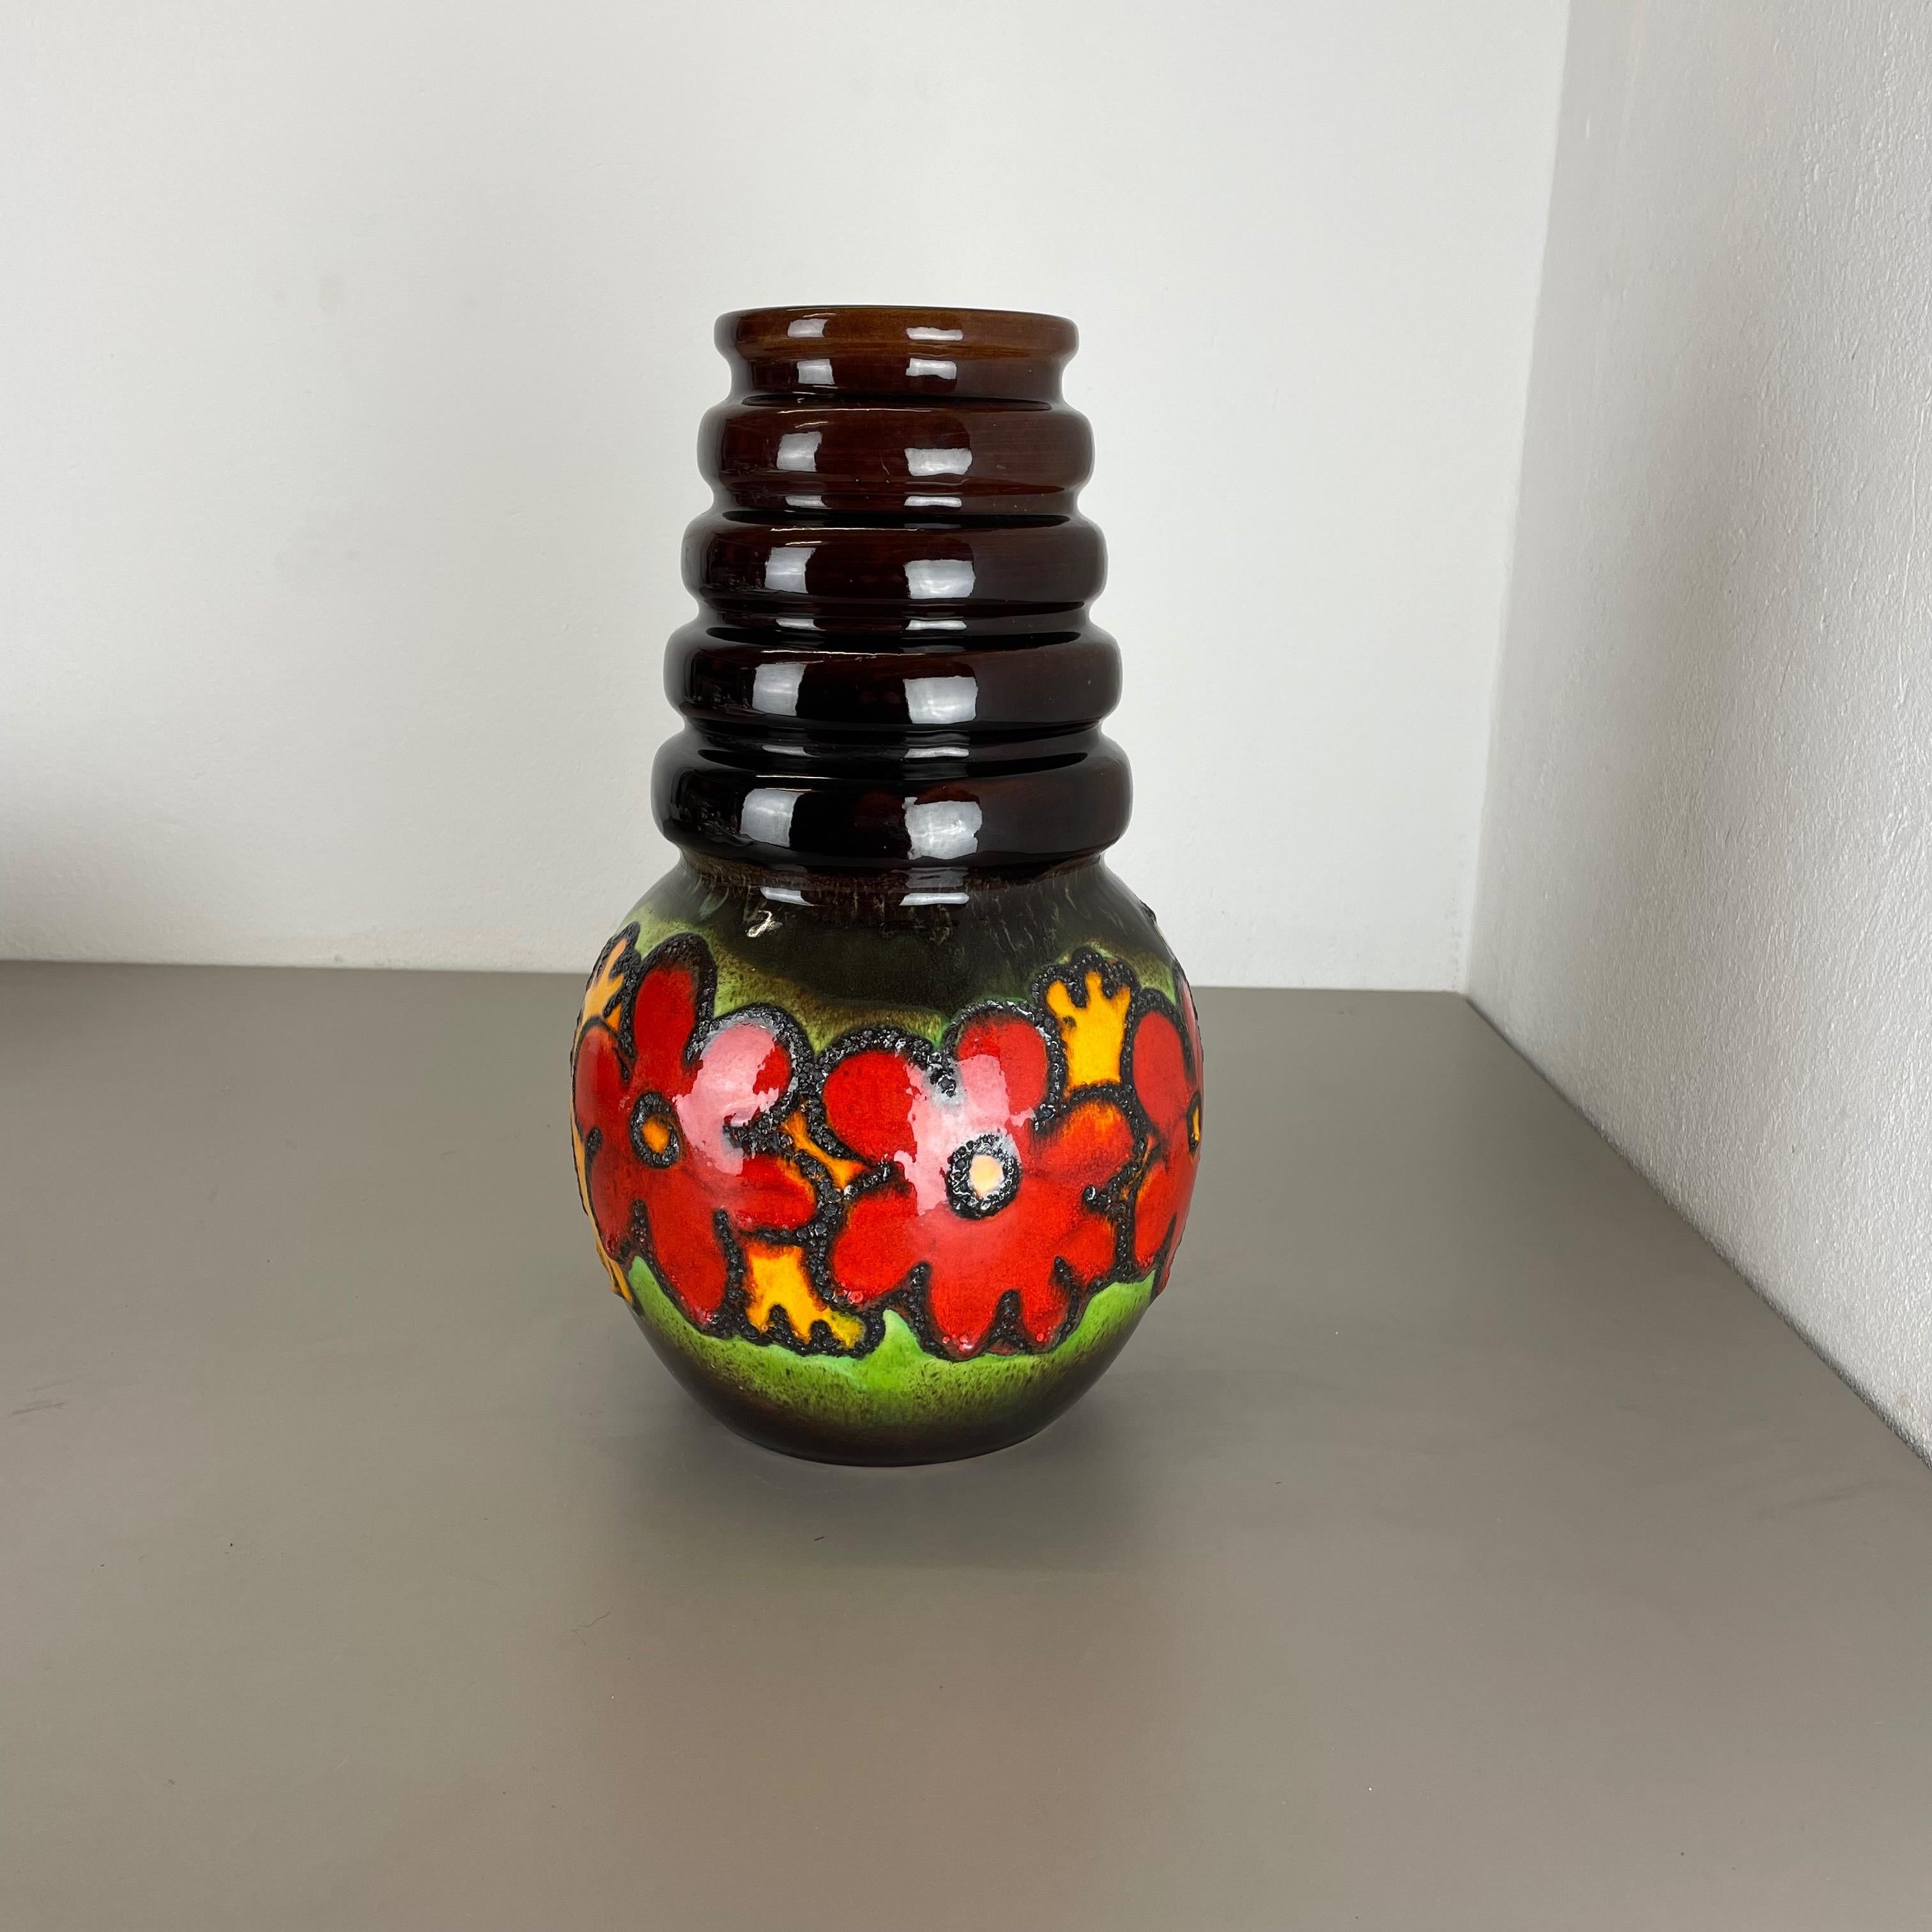 Article:

Fat lava art vase extra large version with floral illustration.




Producer:

Scheurich, Germany



Decade:

1970s


Description:

This original vintage vase was produced in the 1970s in Germany. It is made of ceramic